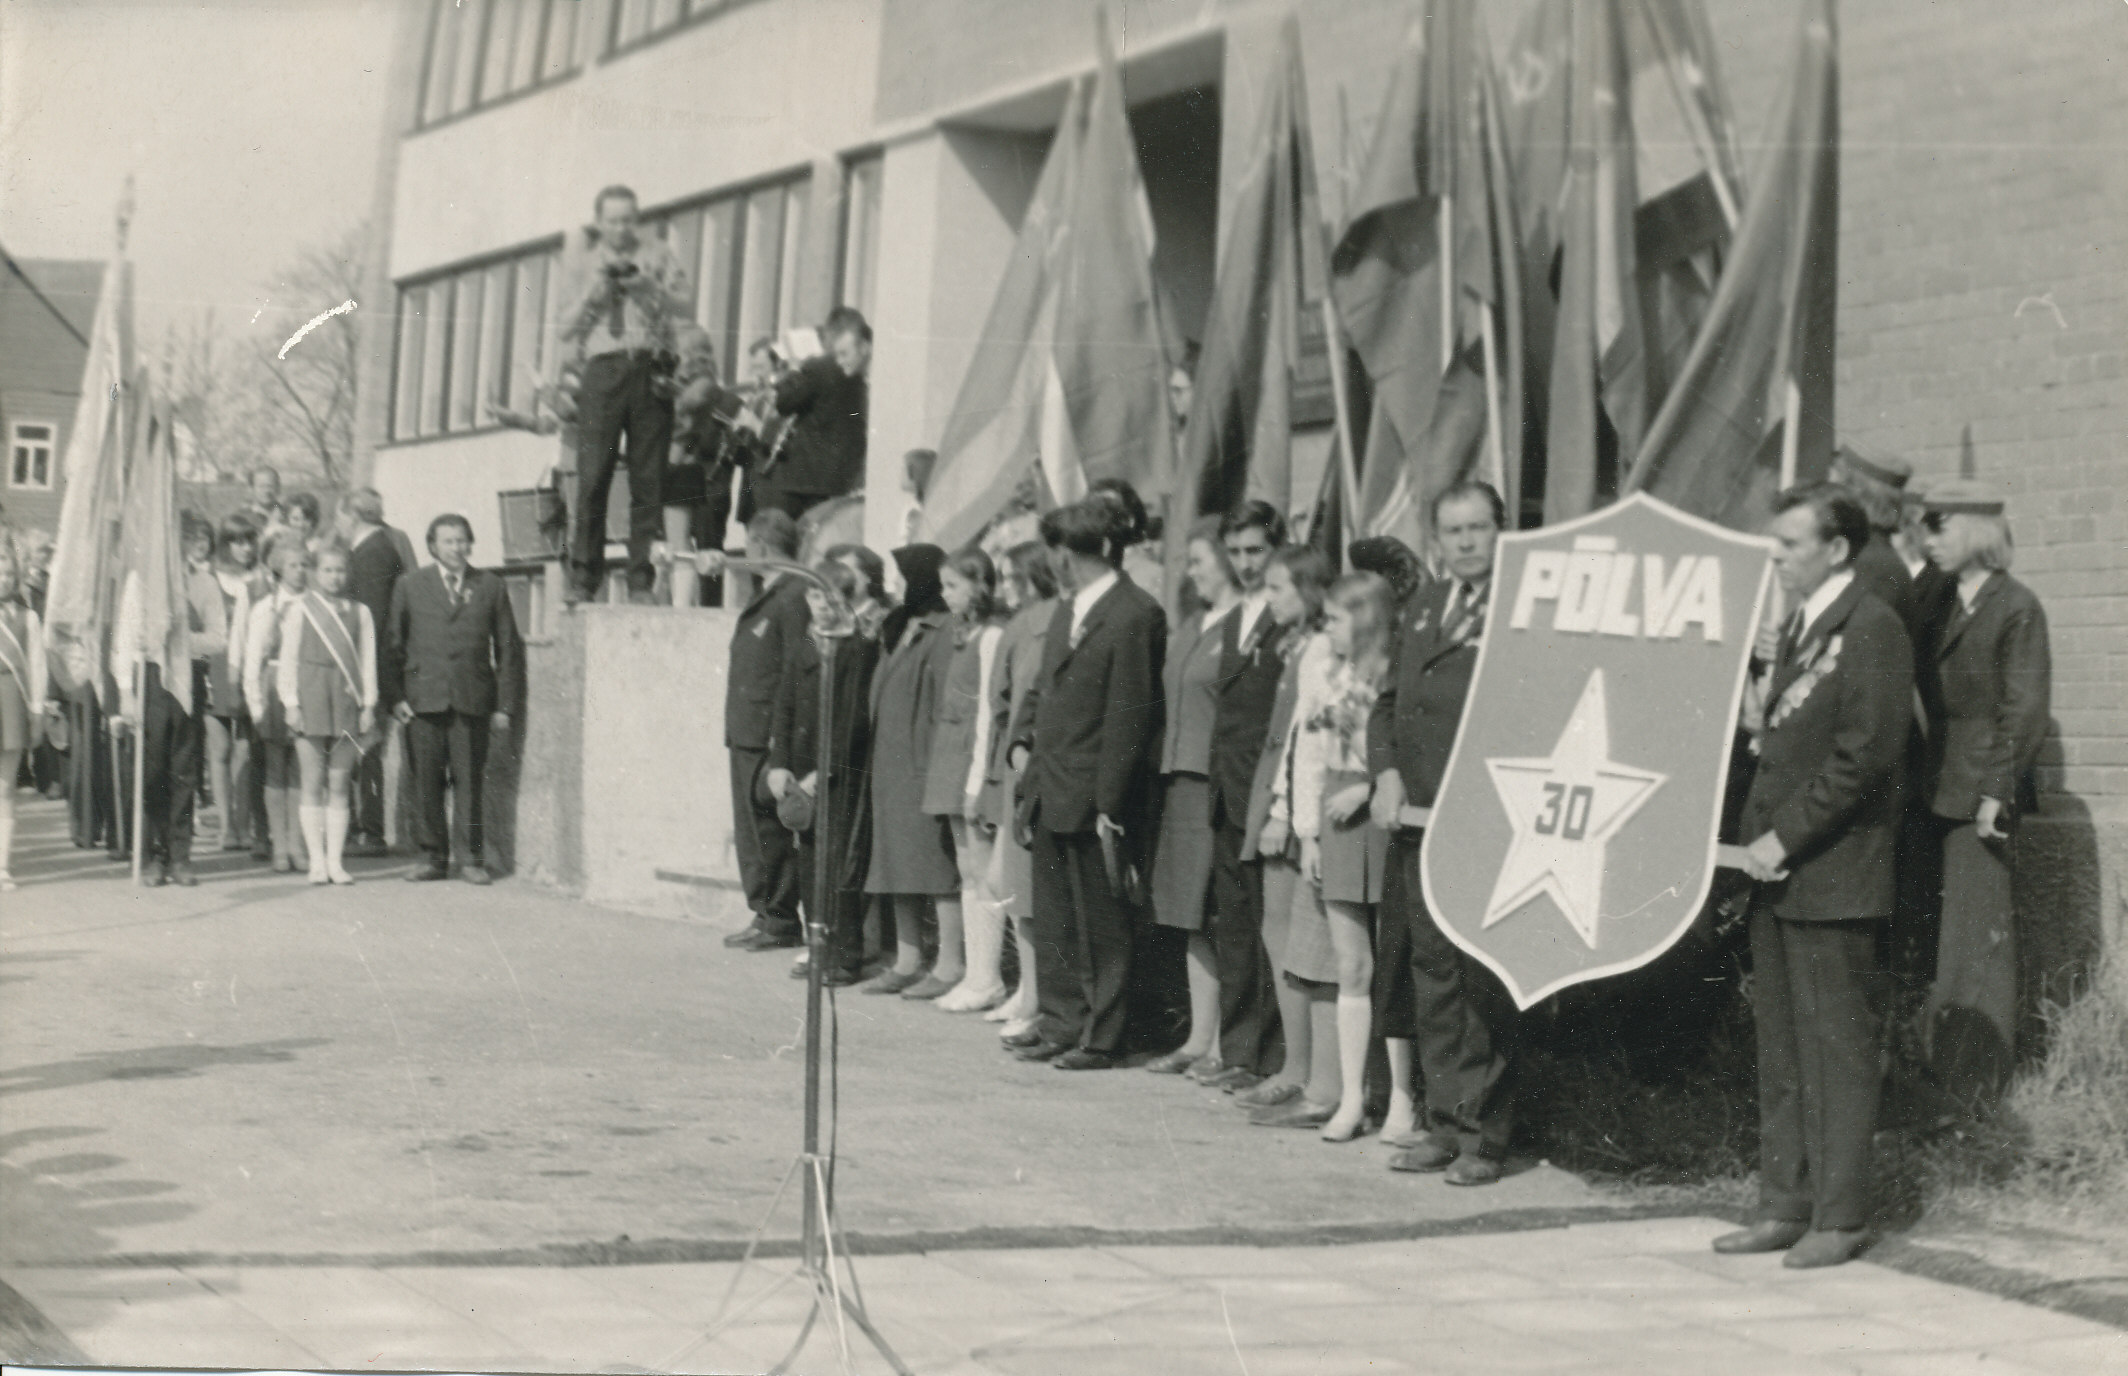 Photo. Celebration of the winning holiday in Põlva in 1975. Participants from the miting before the Executive Committee.